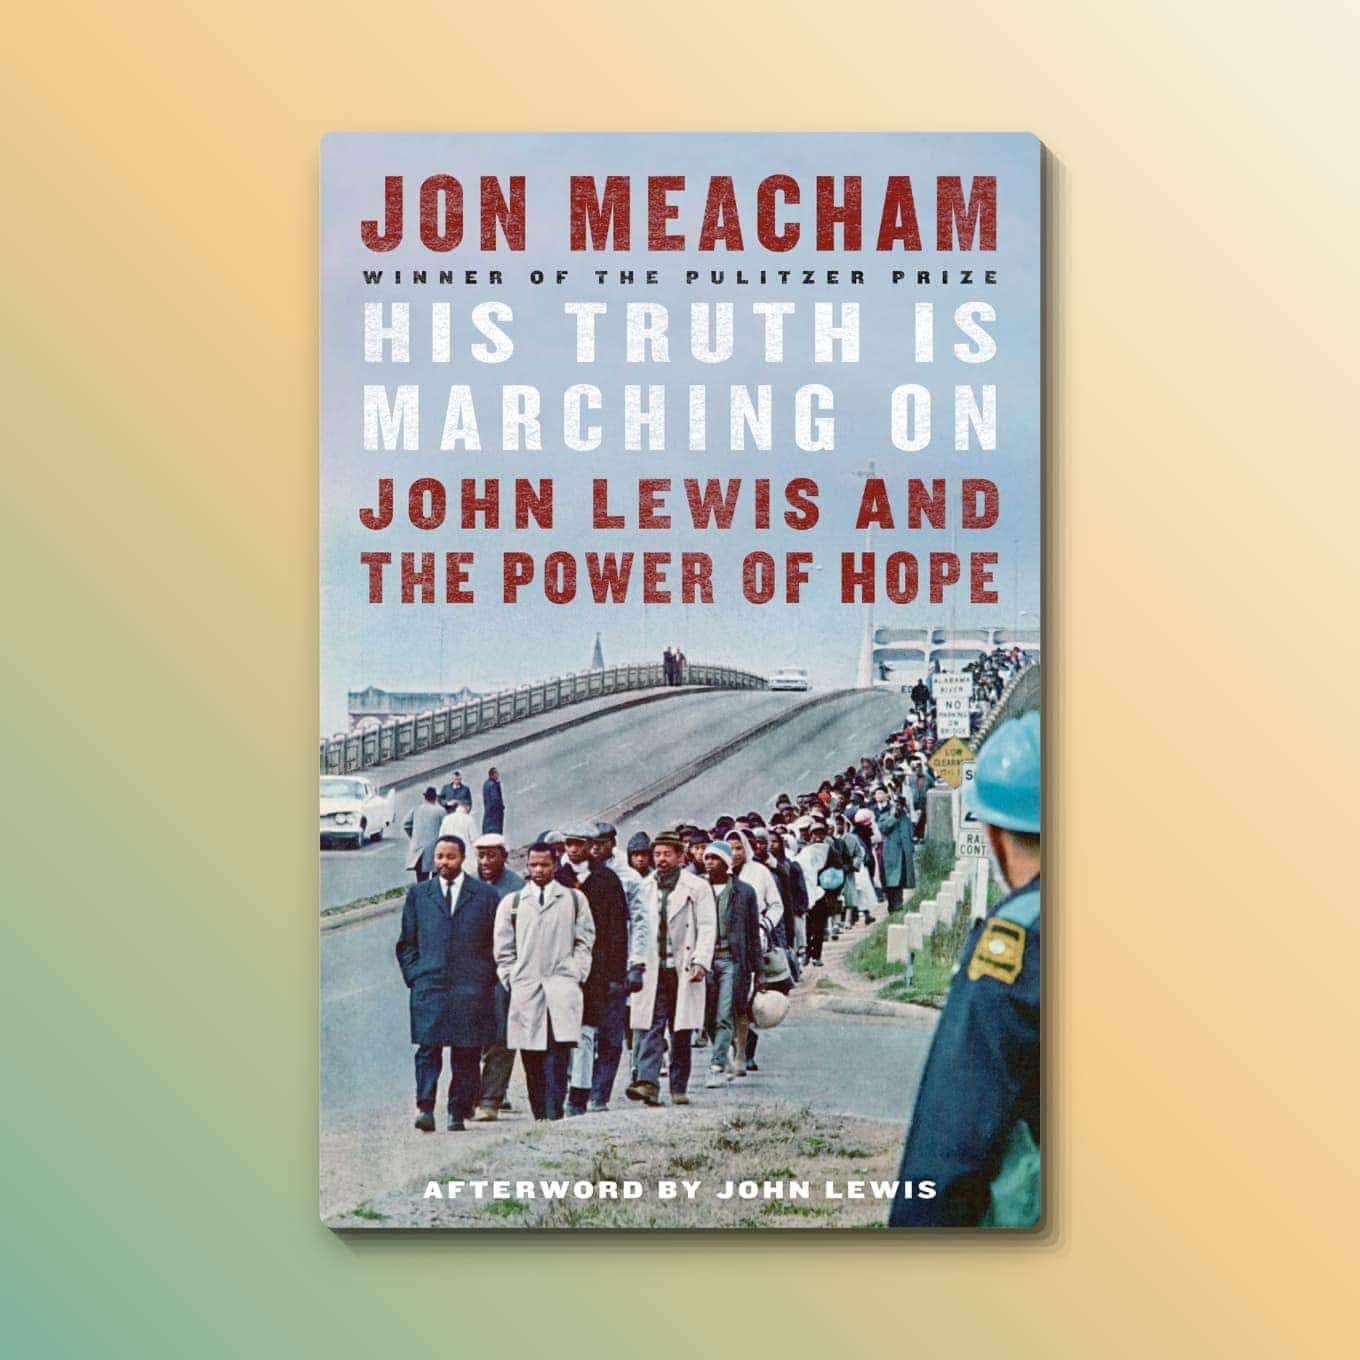 “His Truth Is Marching On: John Lewis and the Power of Hope” by Jon Meacham